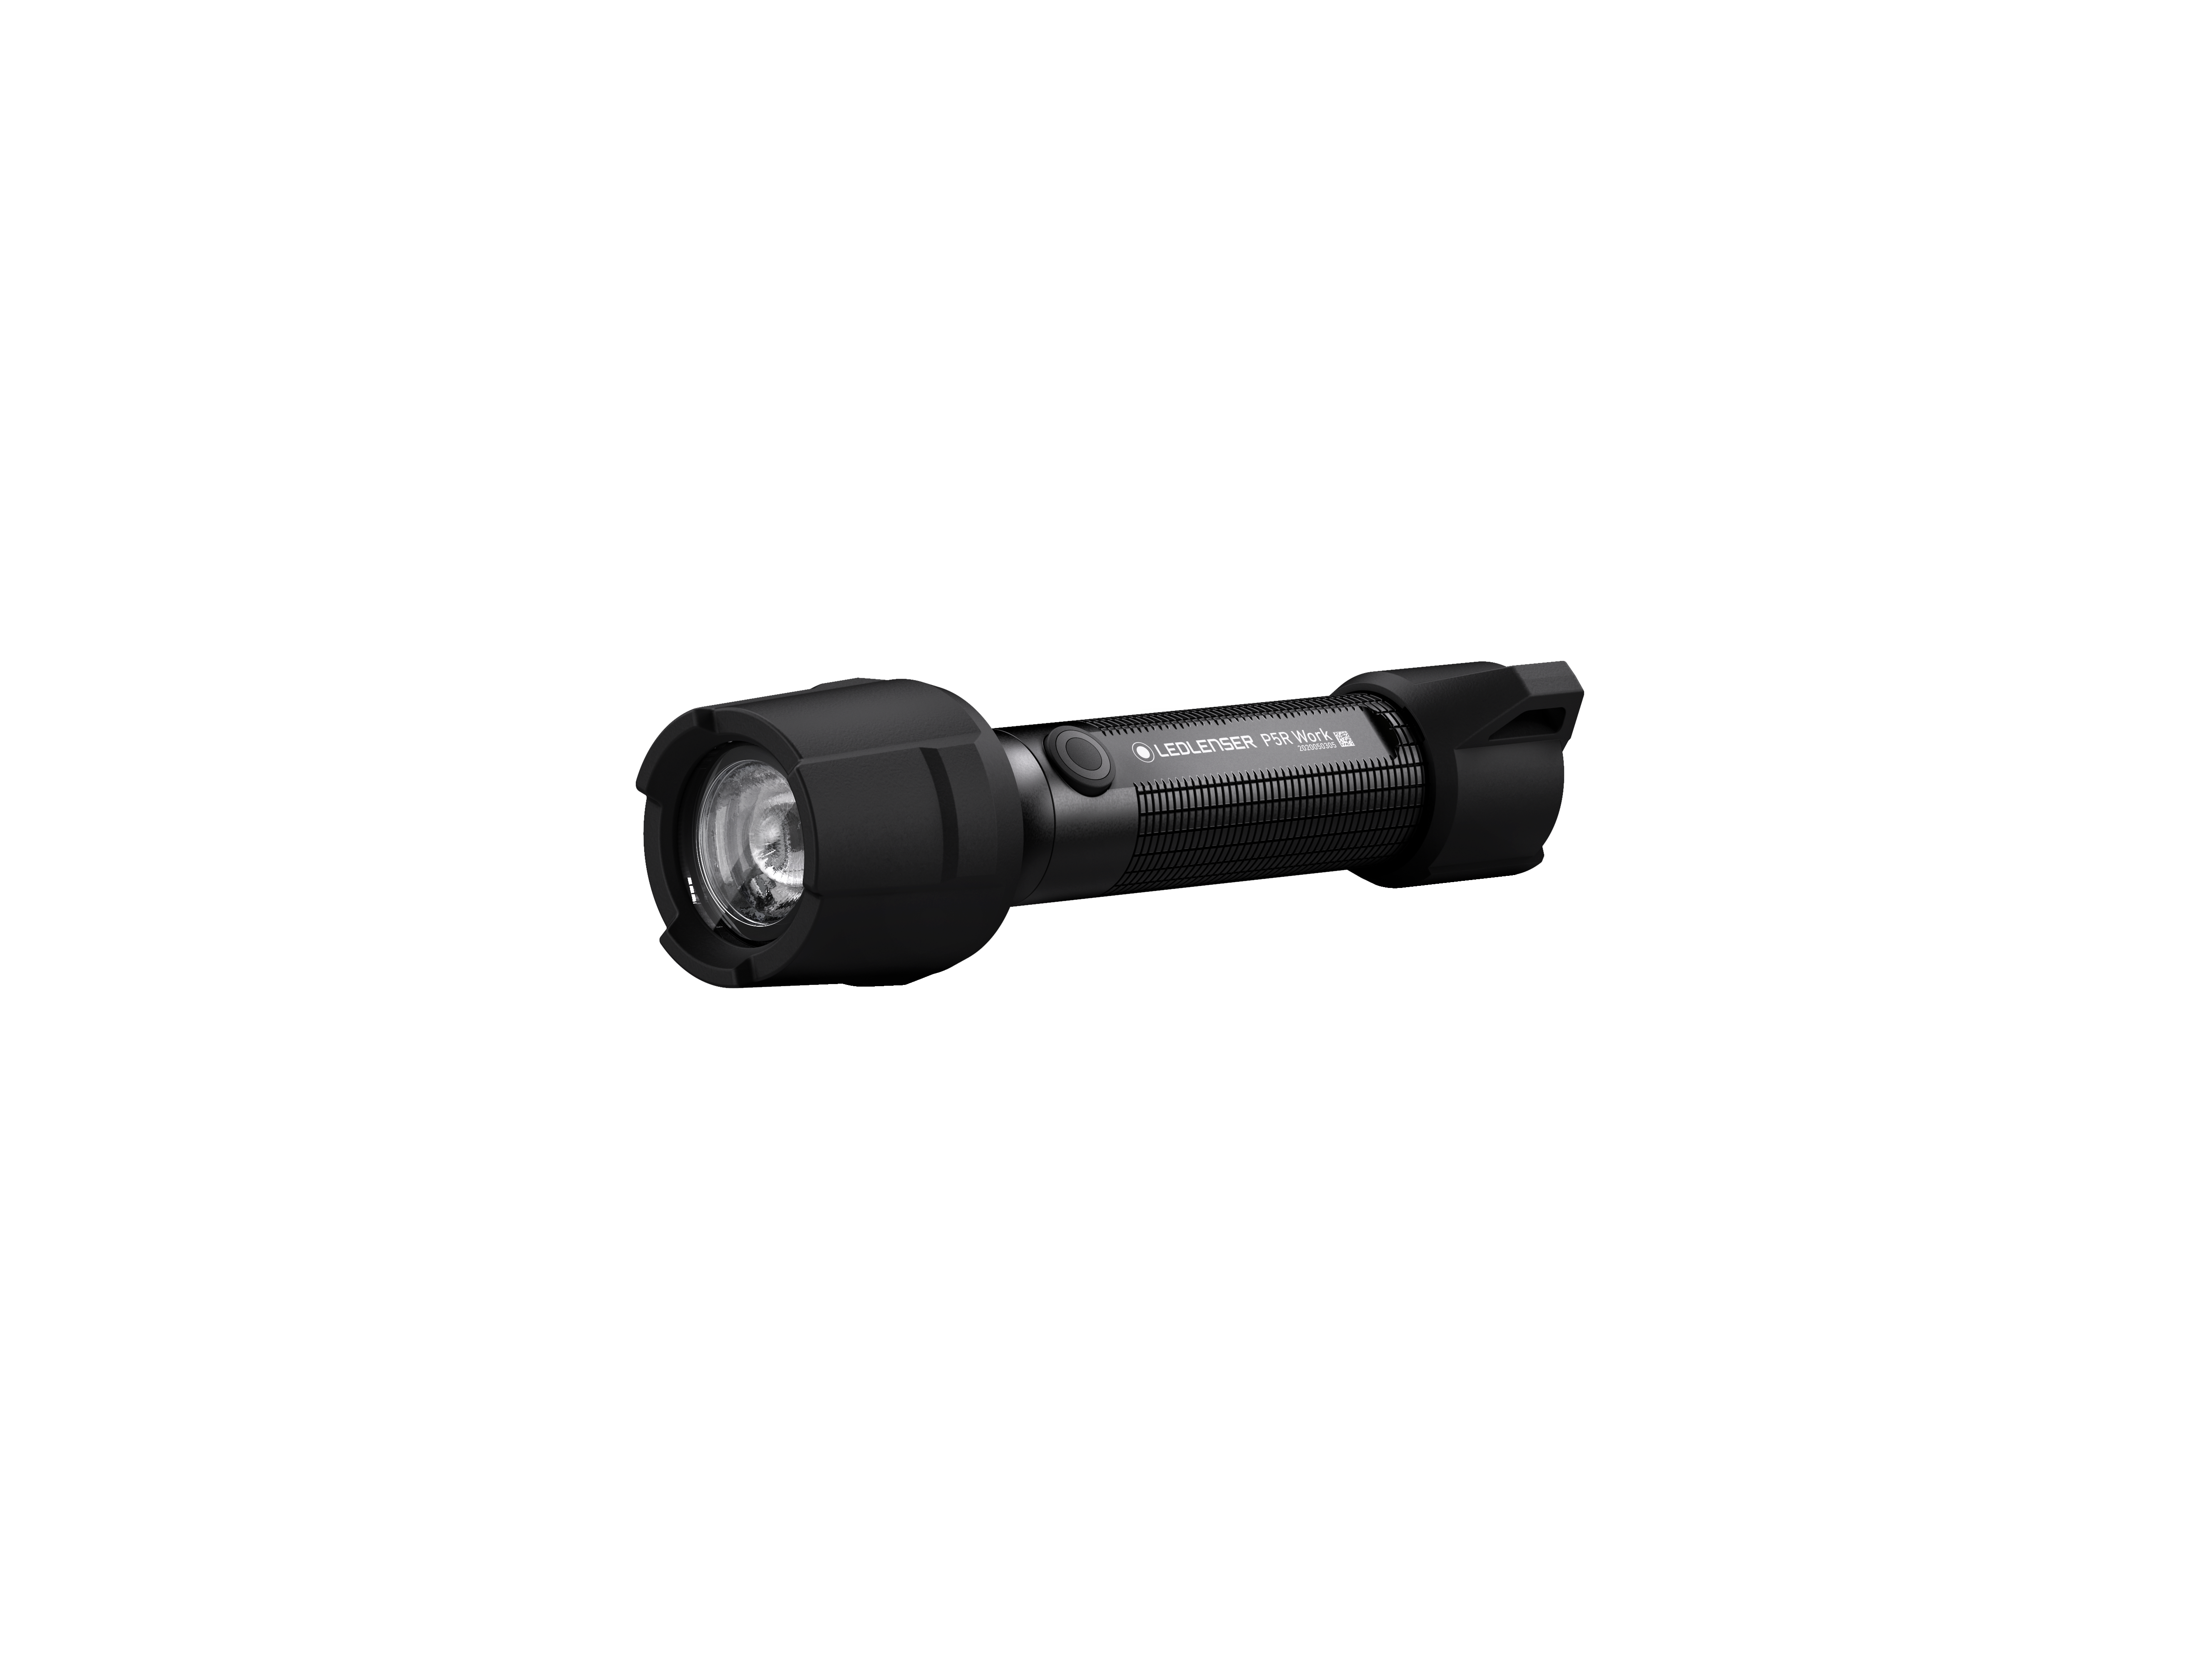 P5R Core: Flashlight in compact pocket size